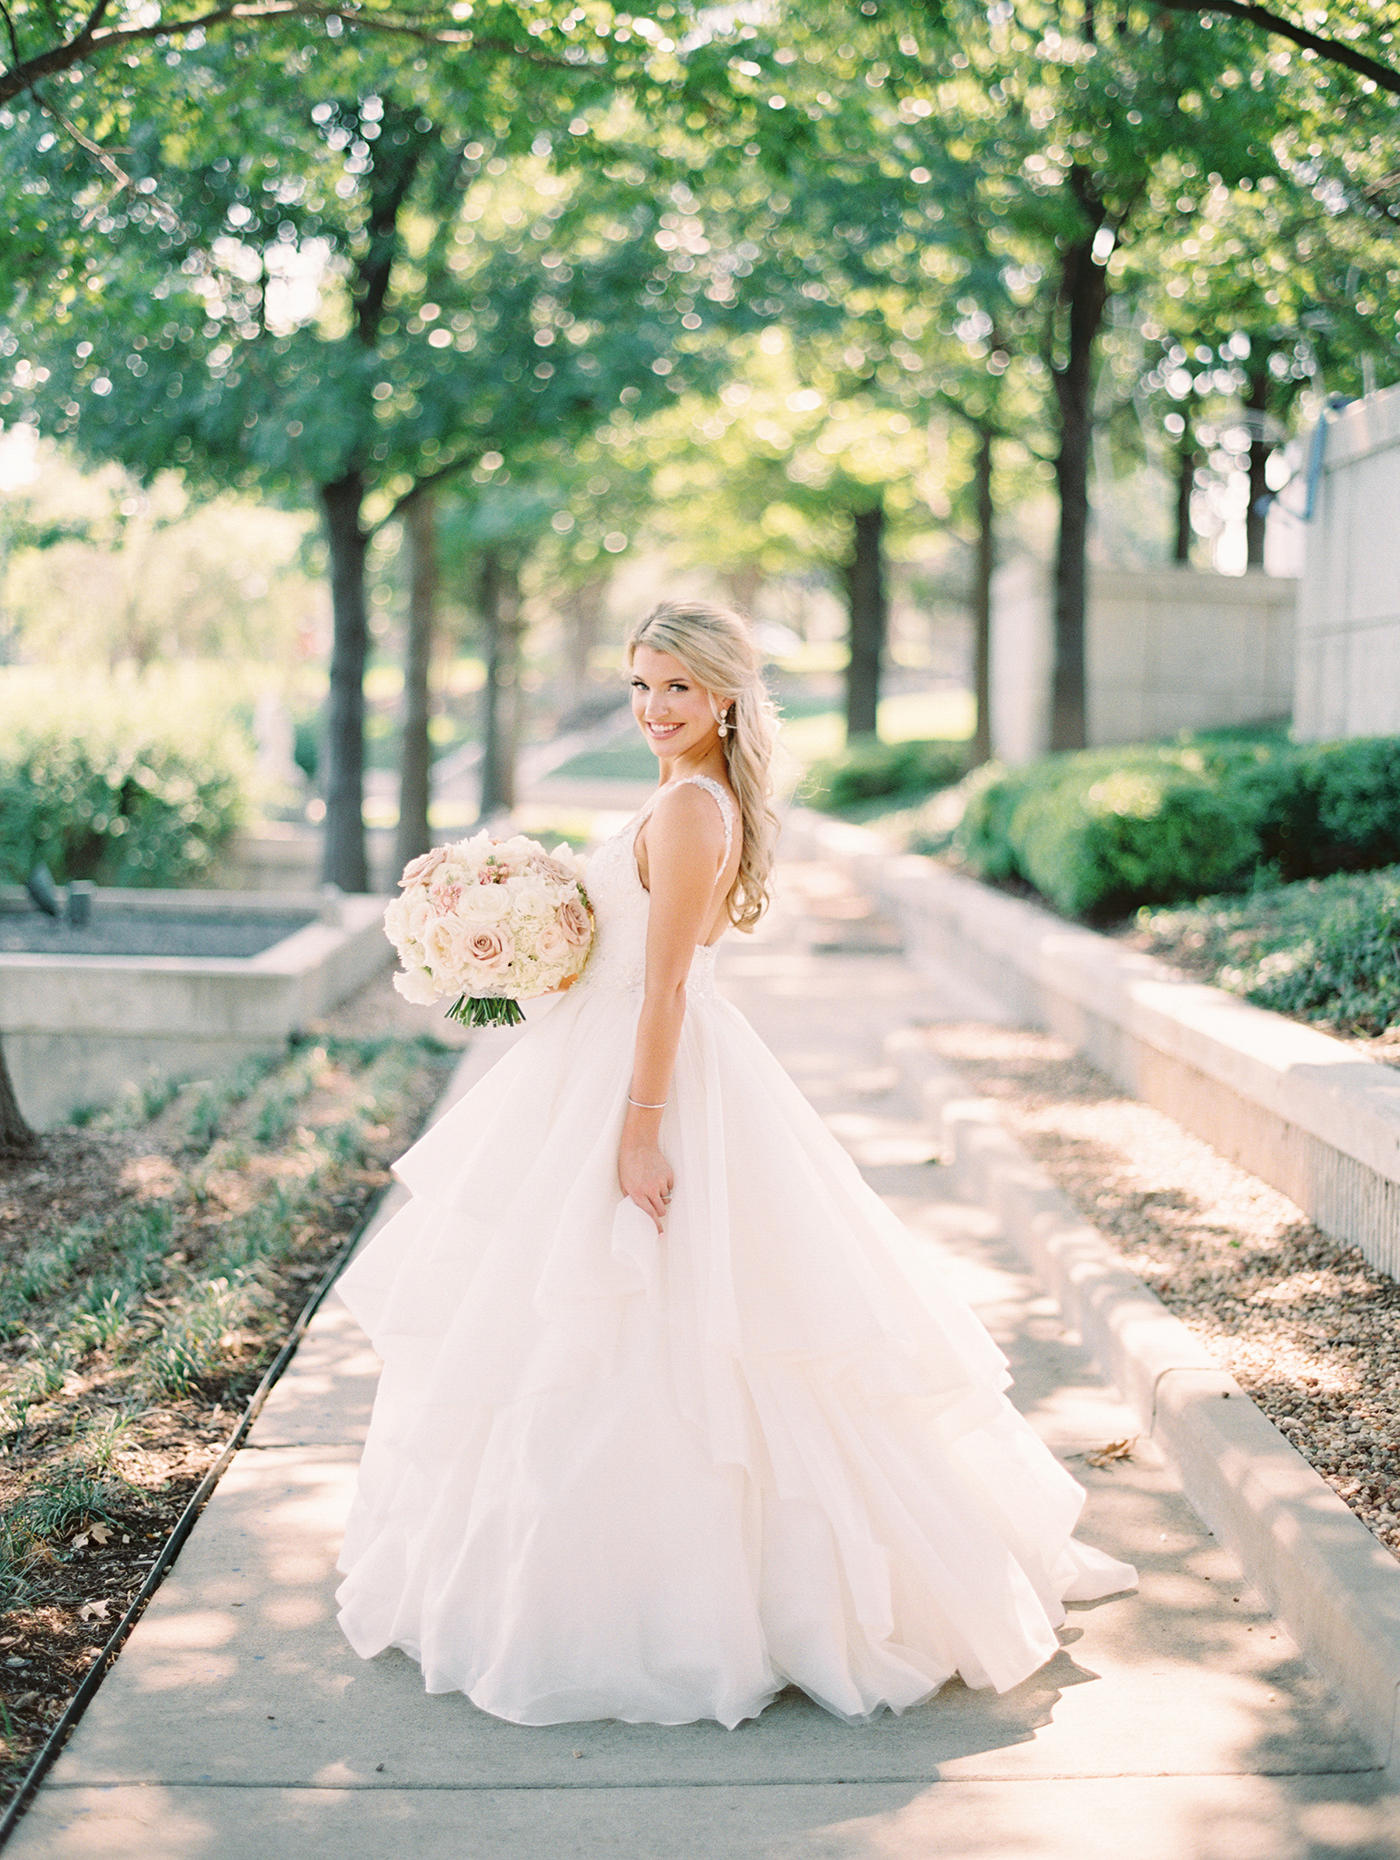 DFW Wedding Planners | A Stylish Soiree - Emily and Dean